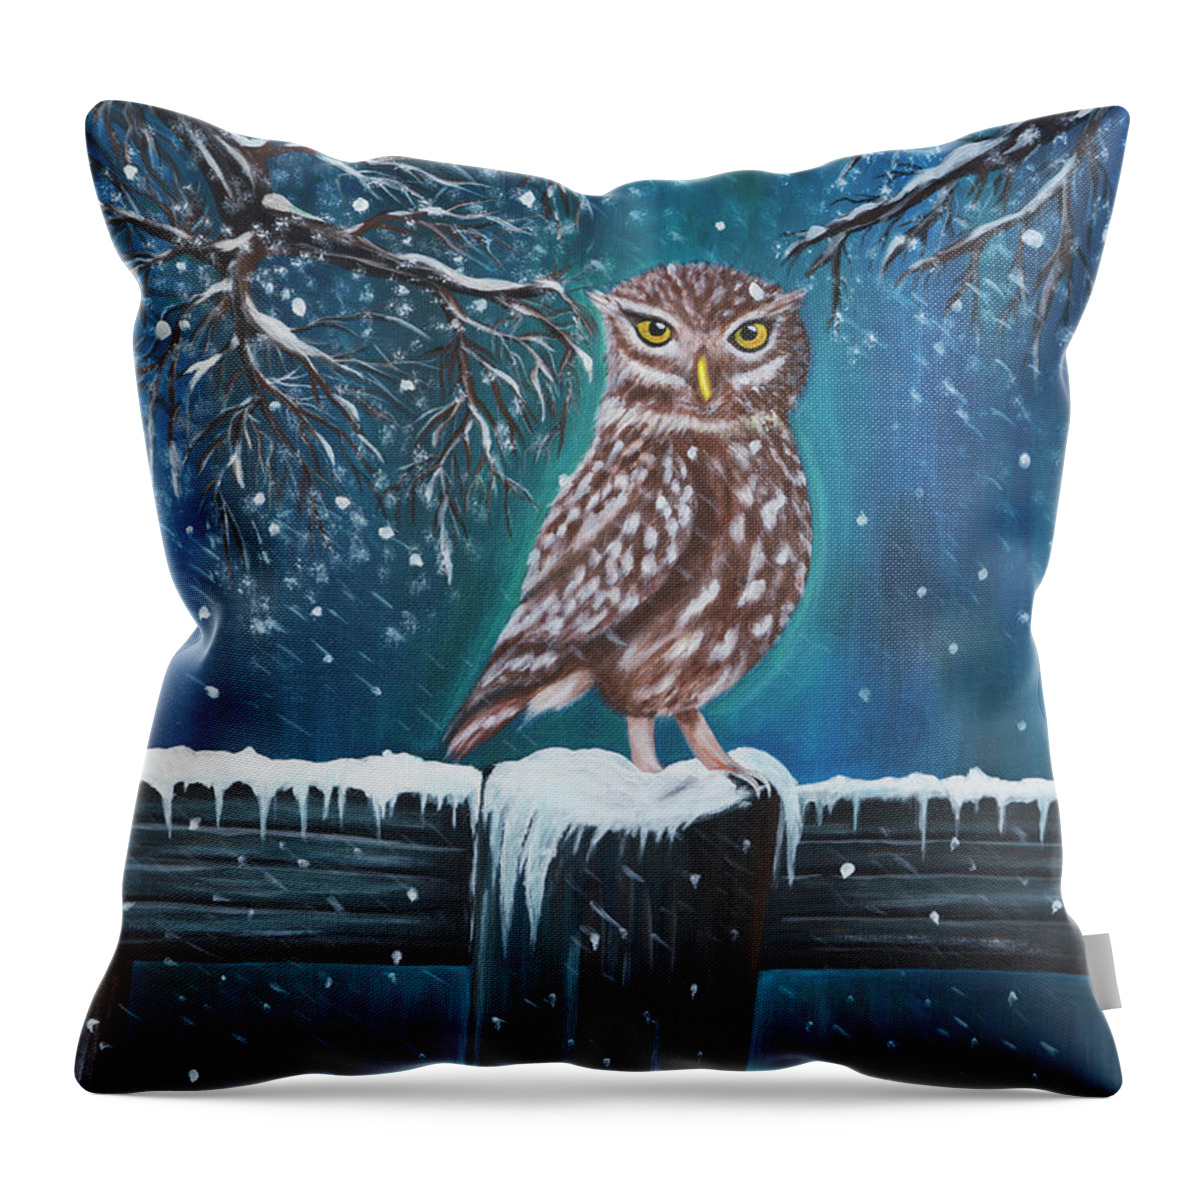 Owl Throw Pillow featuring the painting The Owl by Nicole Paquette